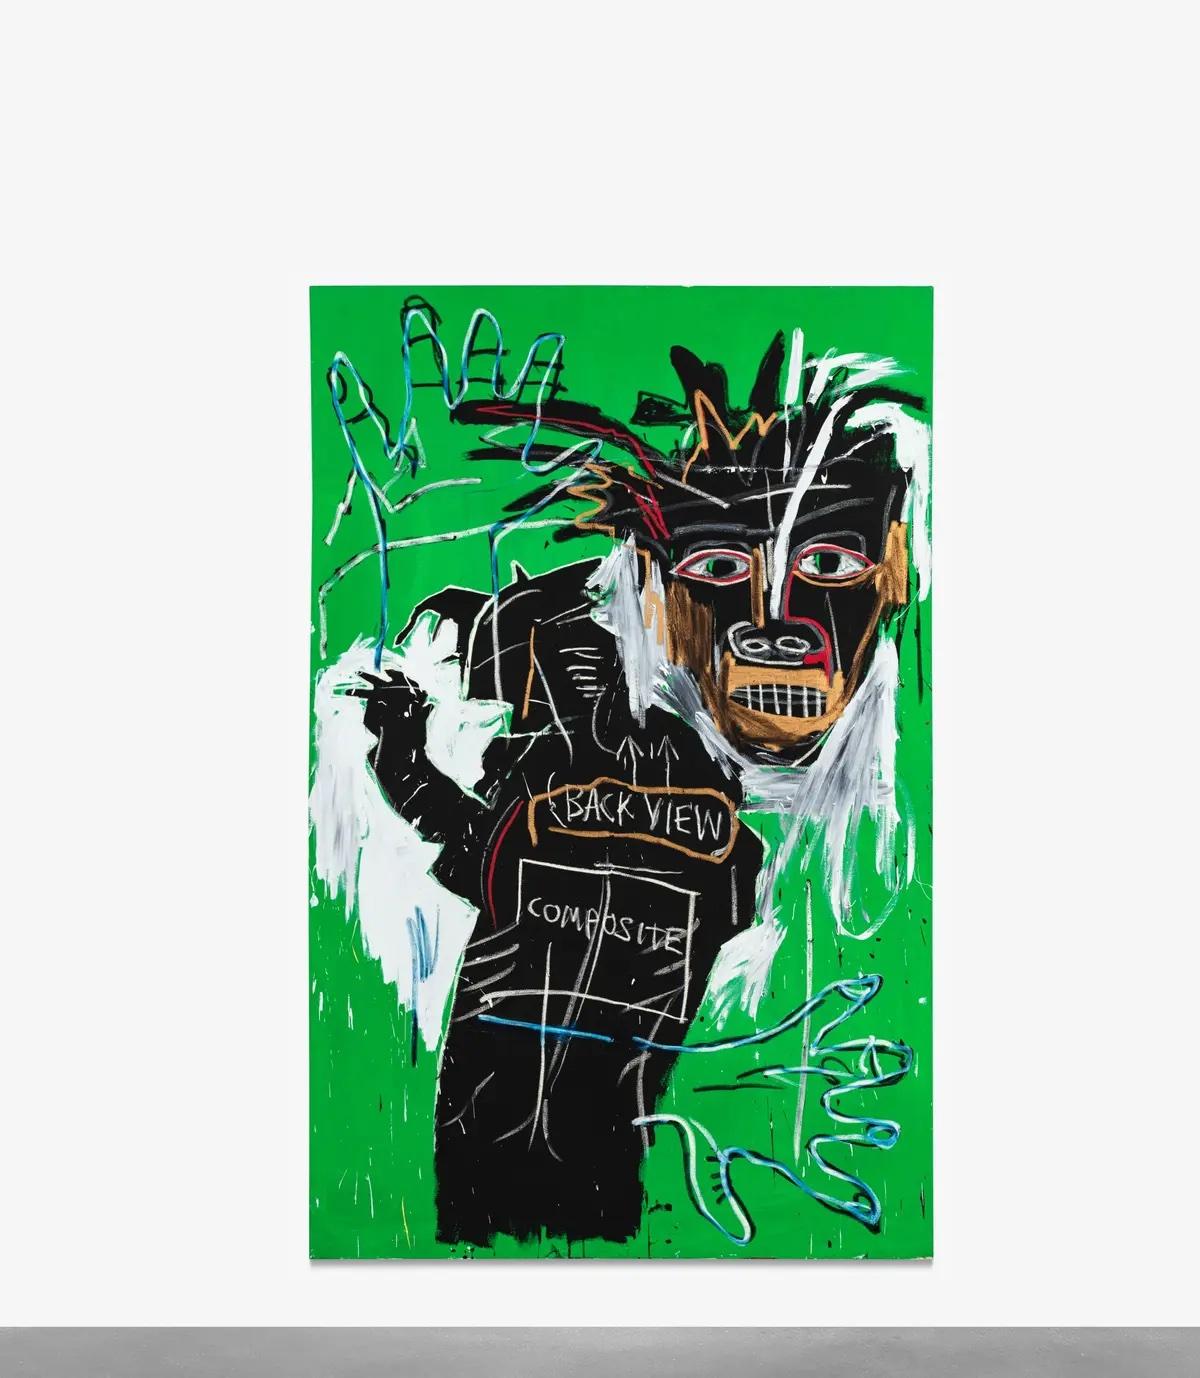 Basquiat Self-Portrait Unseen Since 1999 to Appear at Sotheby's